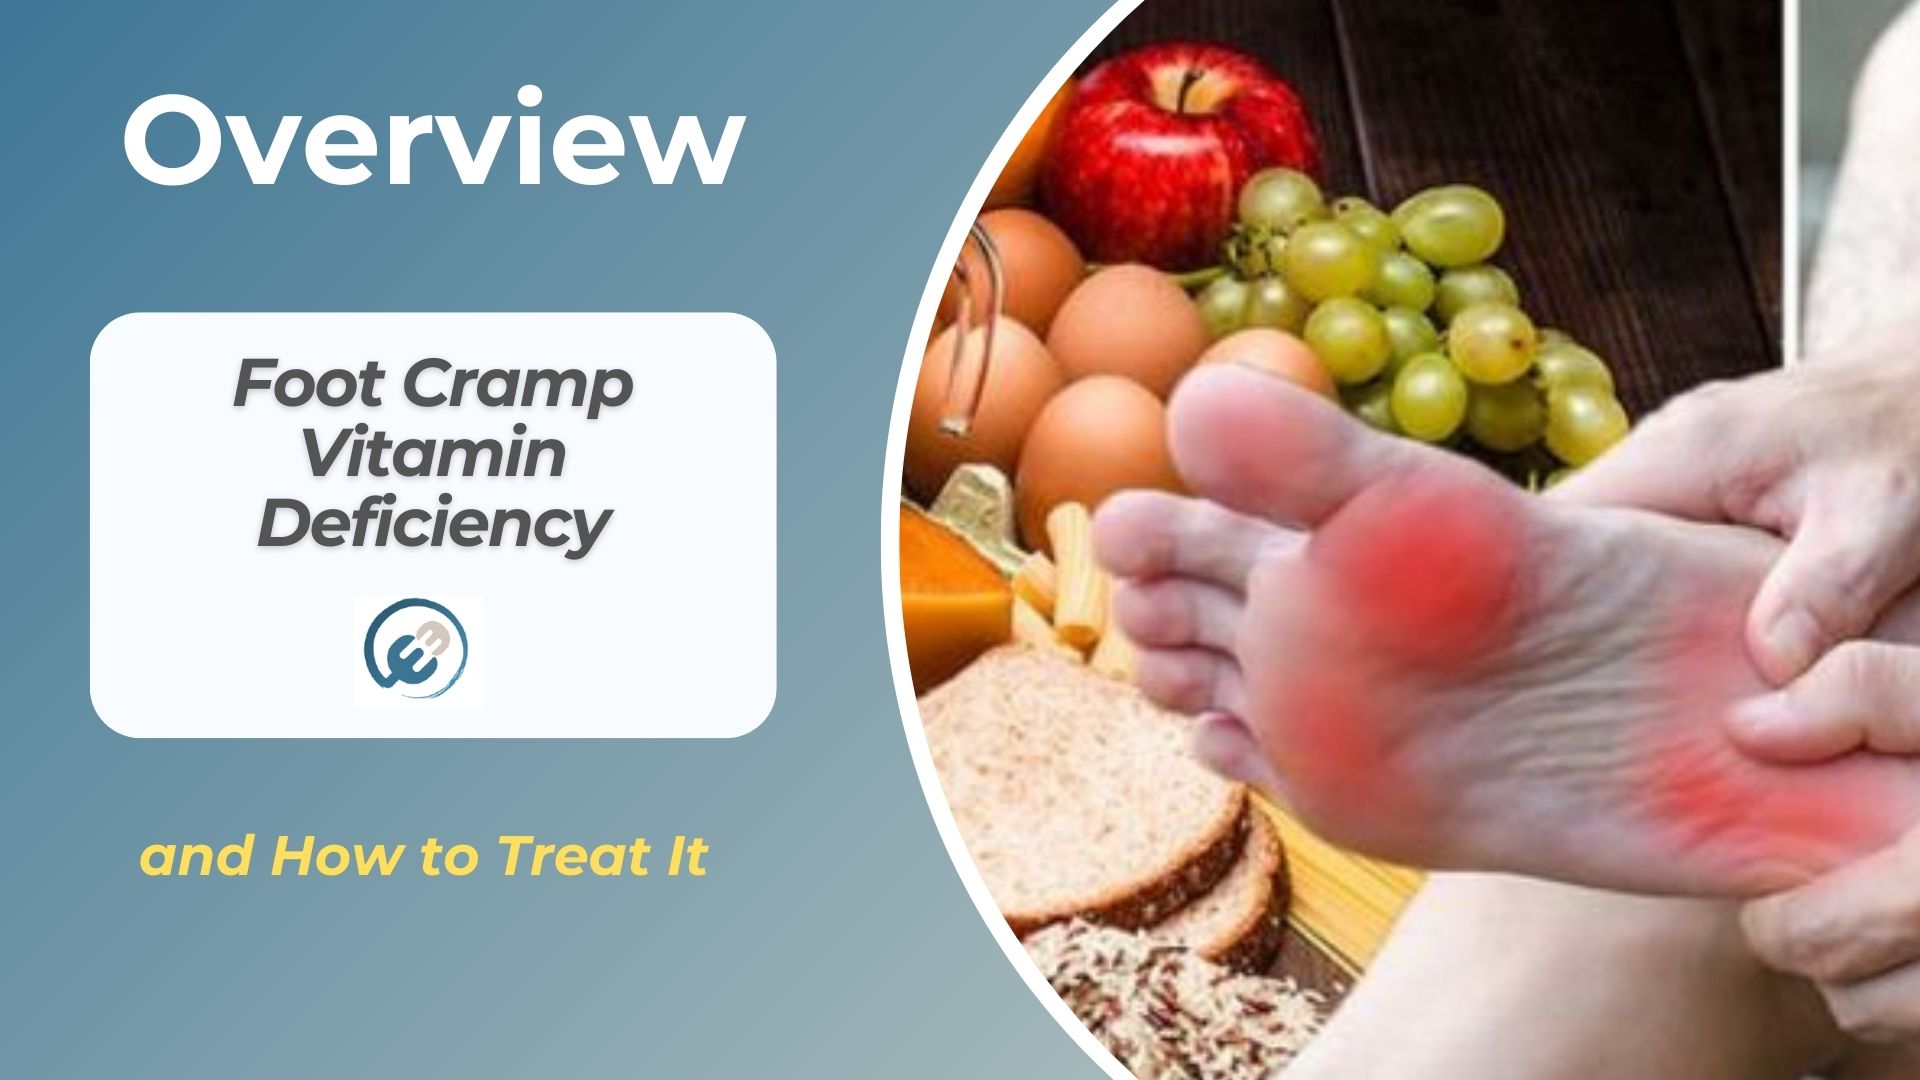 Foot Cramp Vitamin Deficiency and How to Treat It